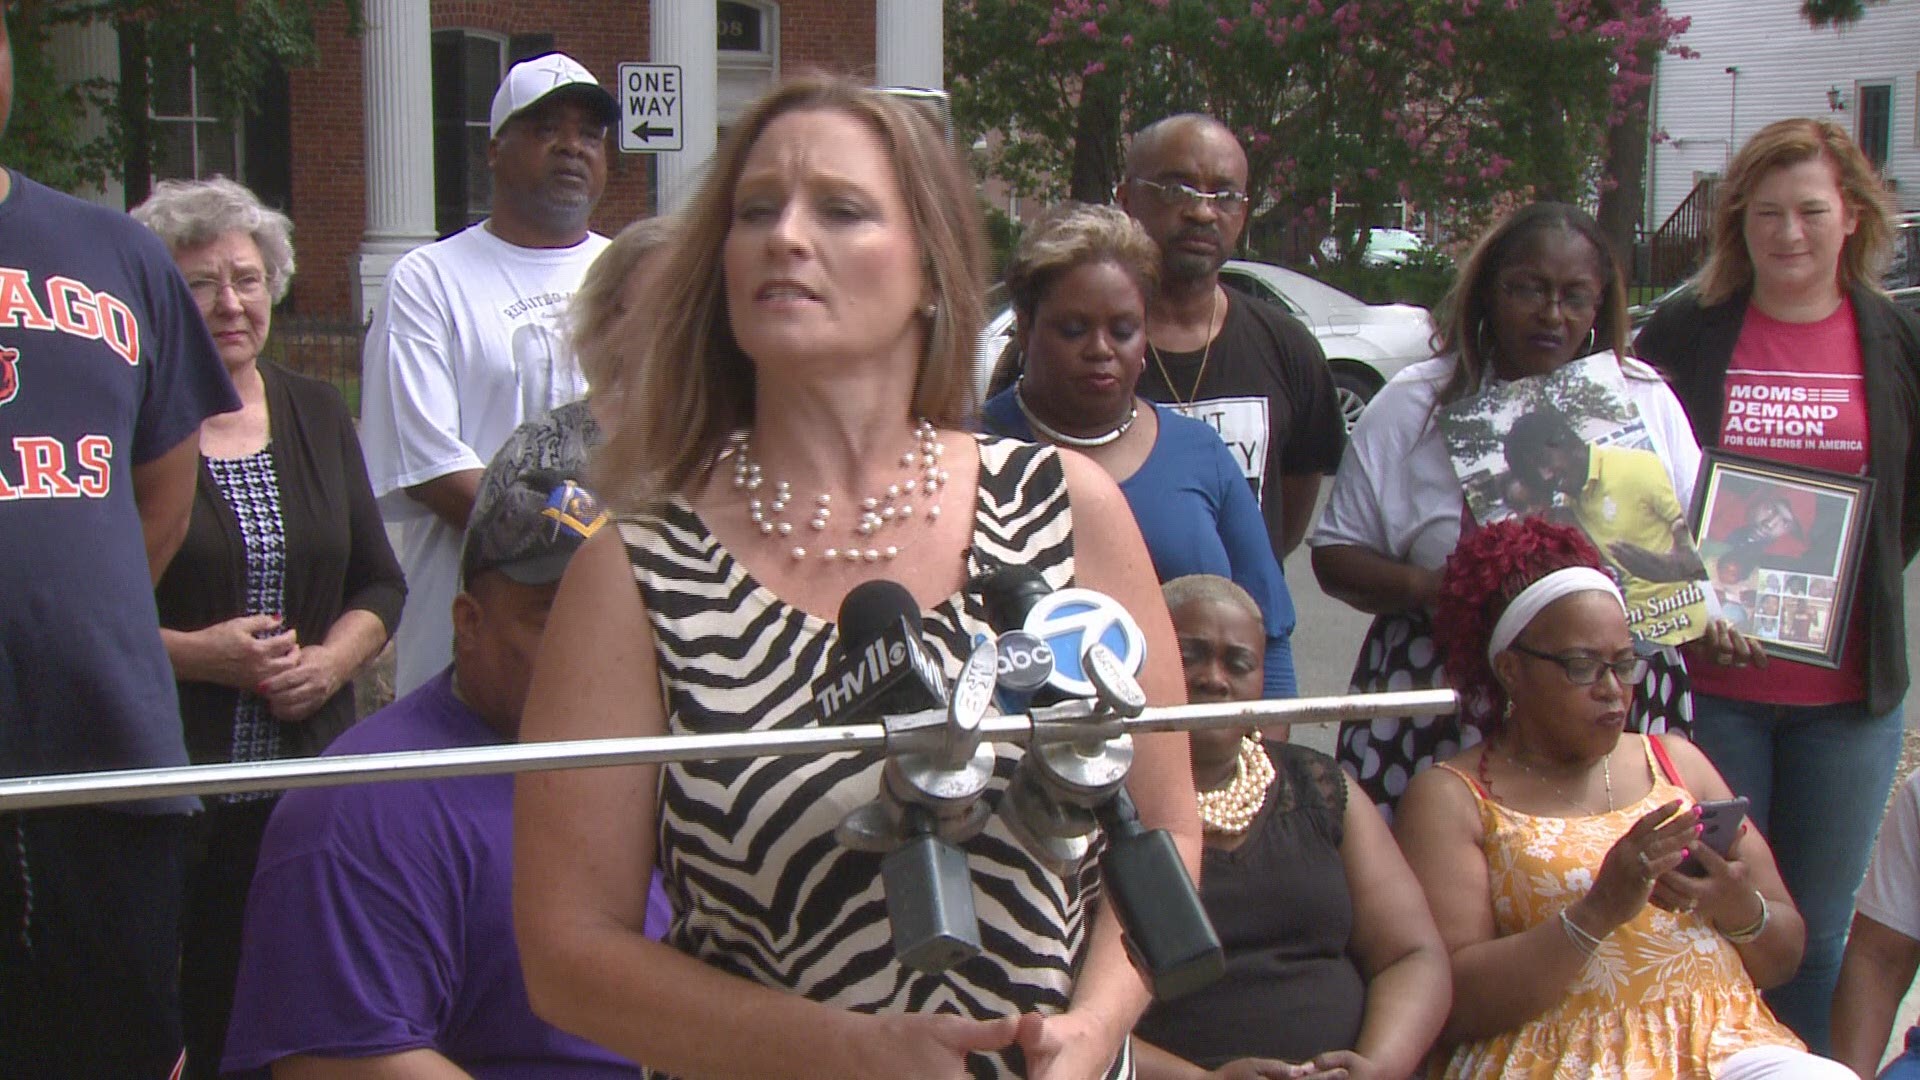 Parents Of Murdered Children Hold Press Conference To Inform The Public